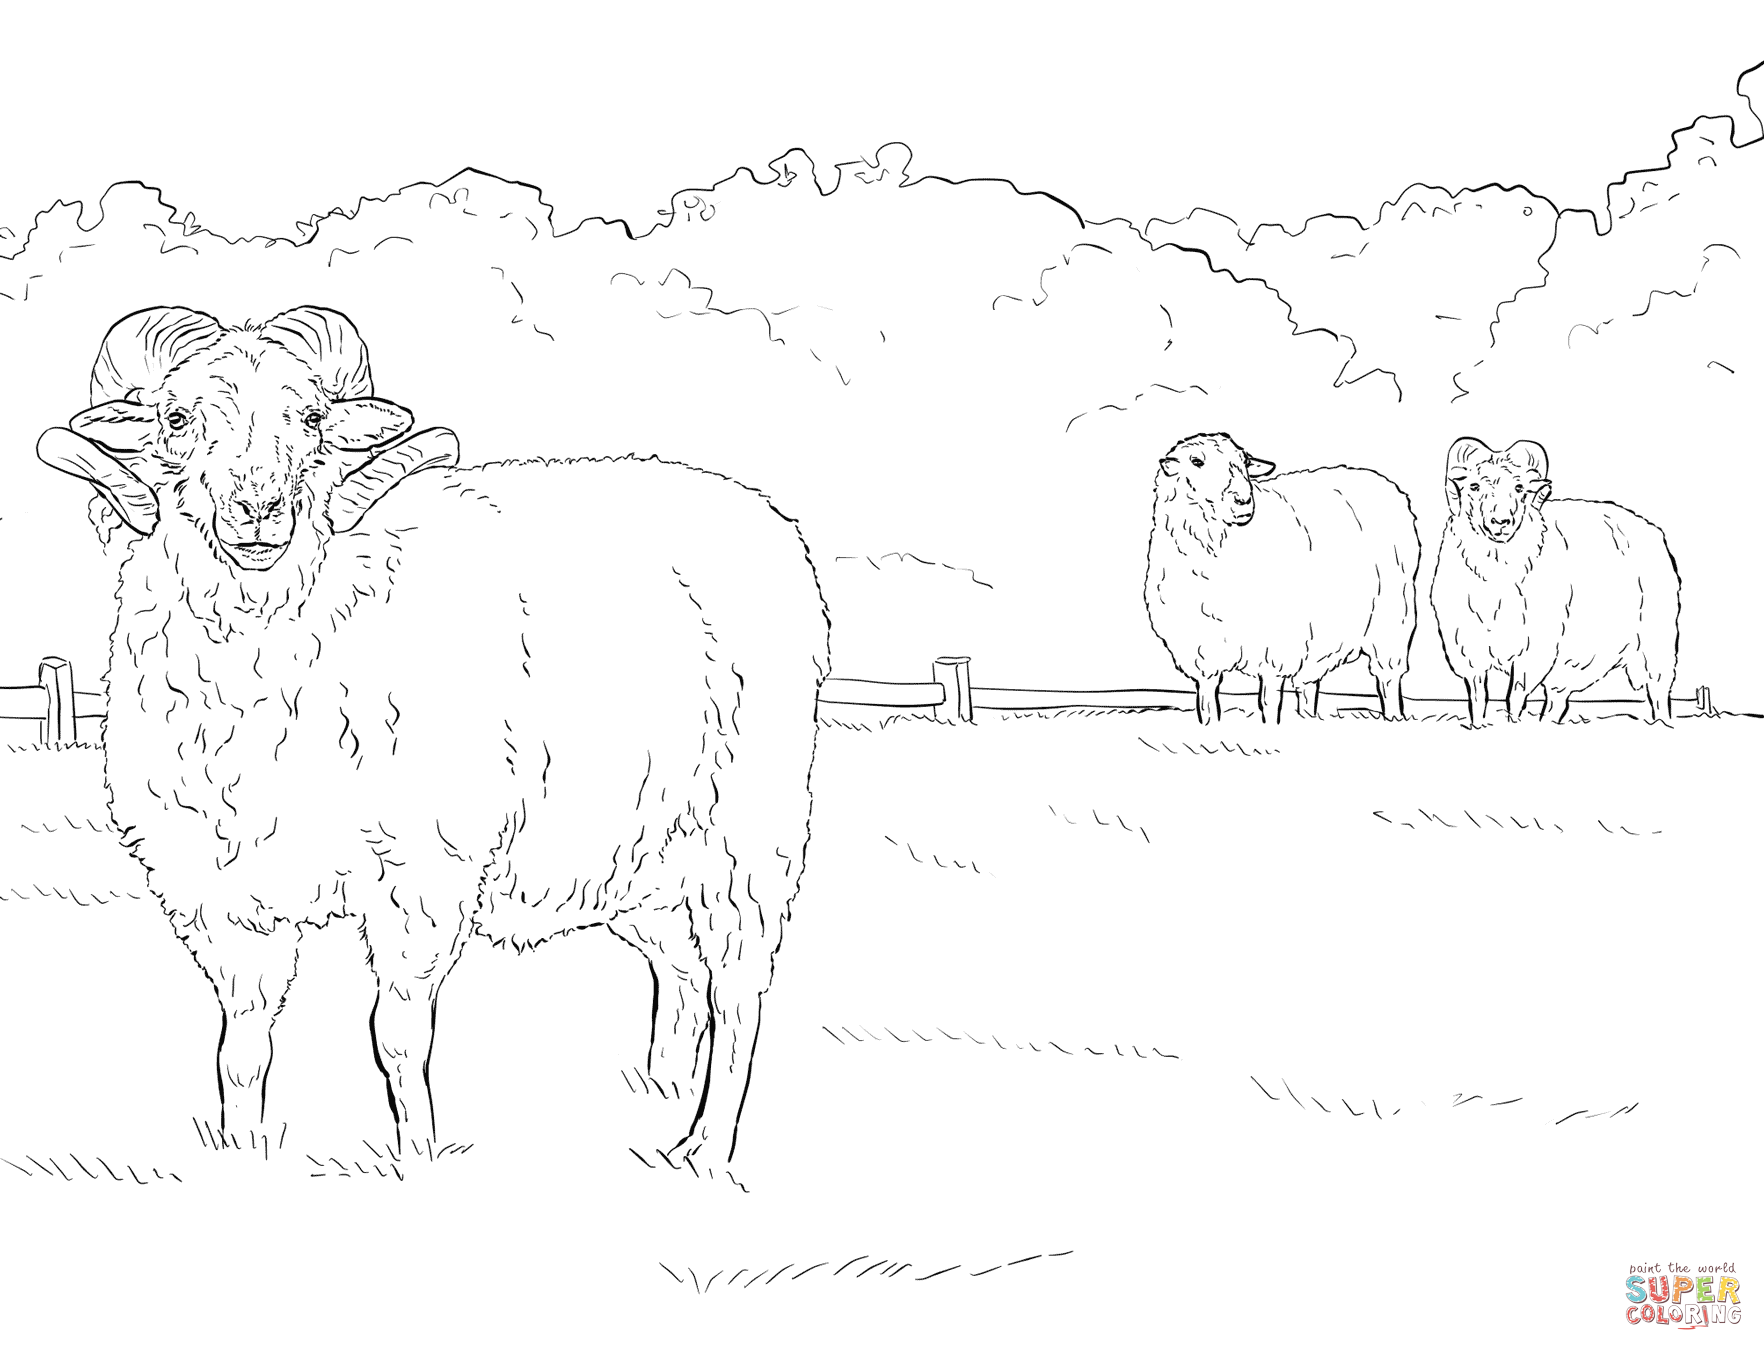 Hog island sheep coloring page free printable coloring pages